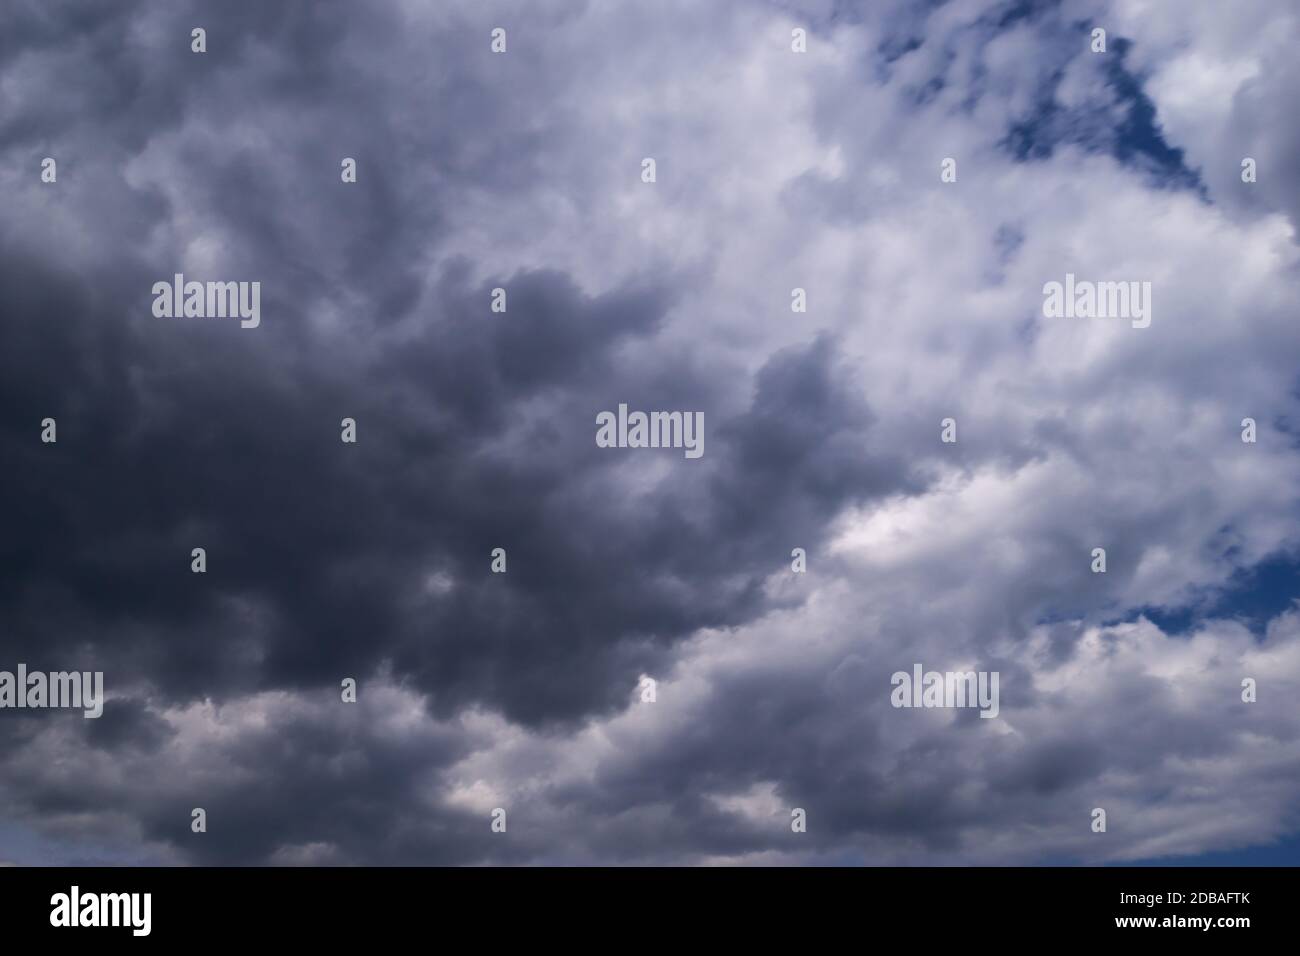 Dramatic Sky With Clouds, Background Stock Photo